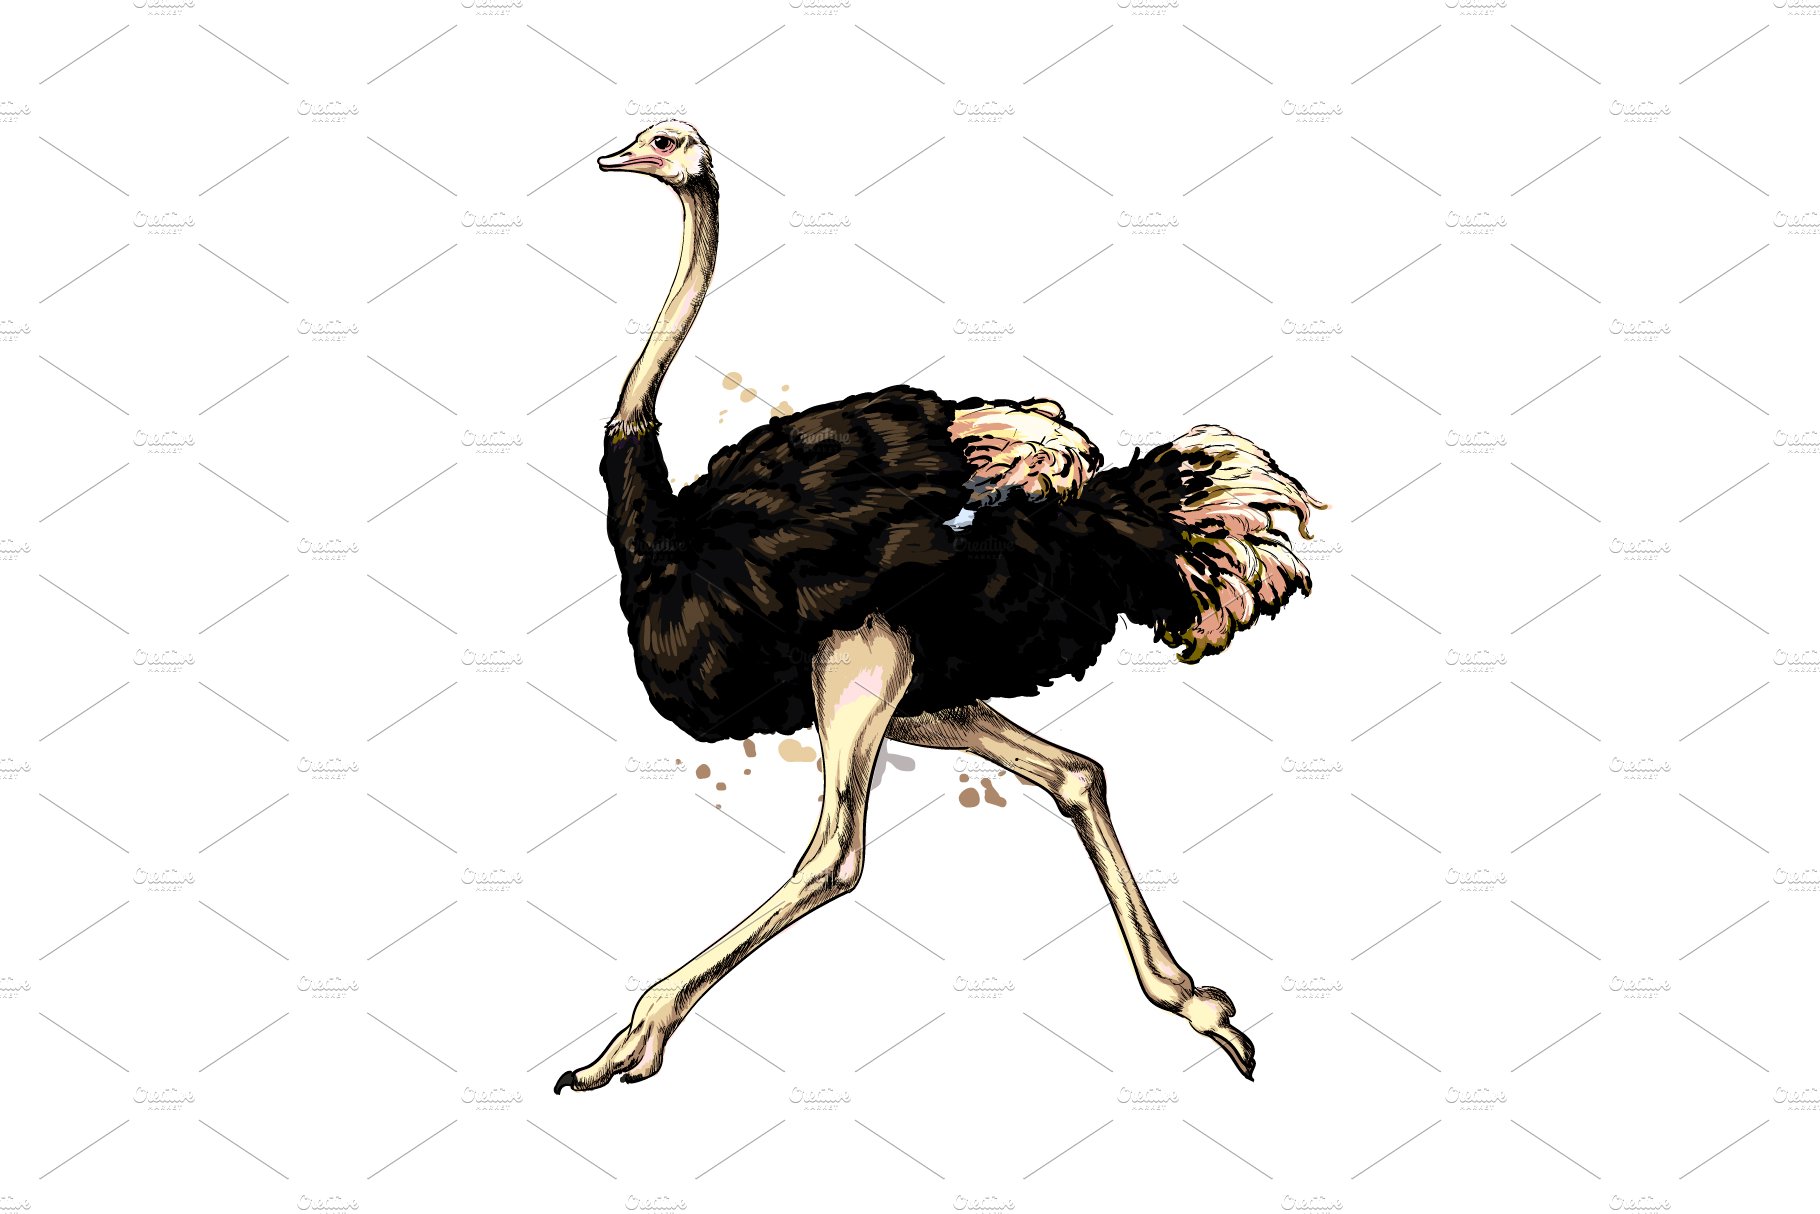 Ostrich from a splash cover image.